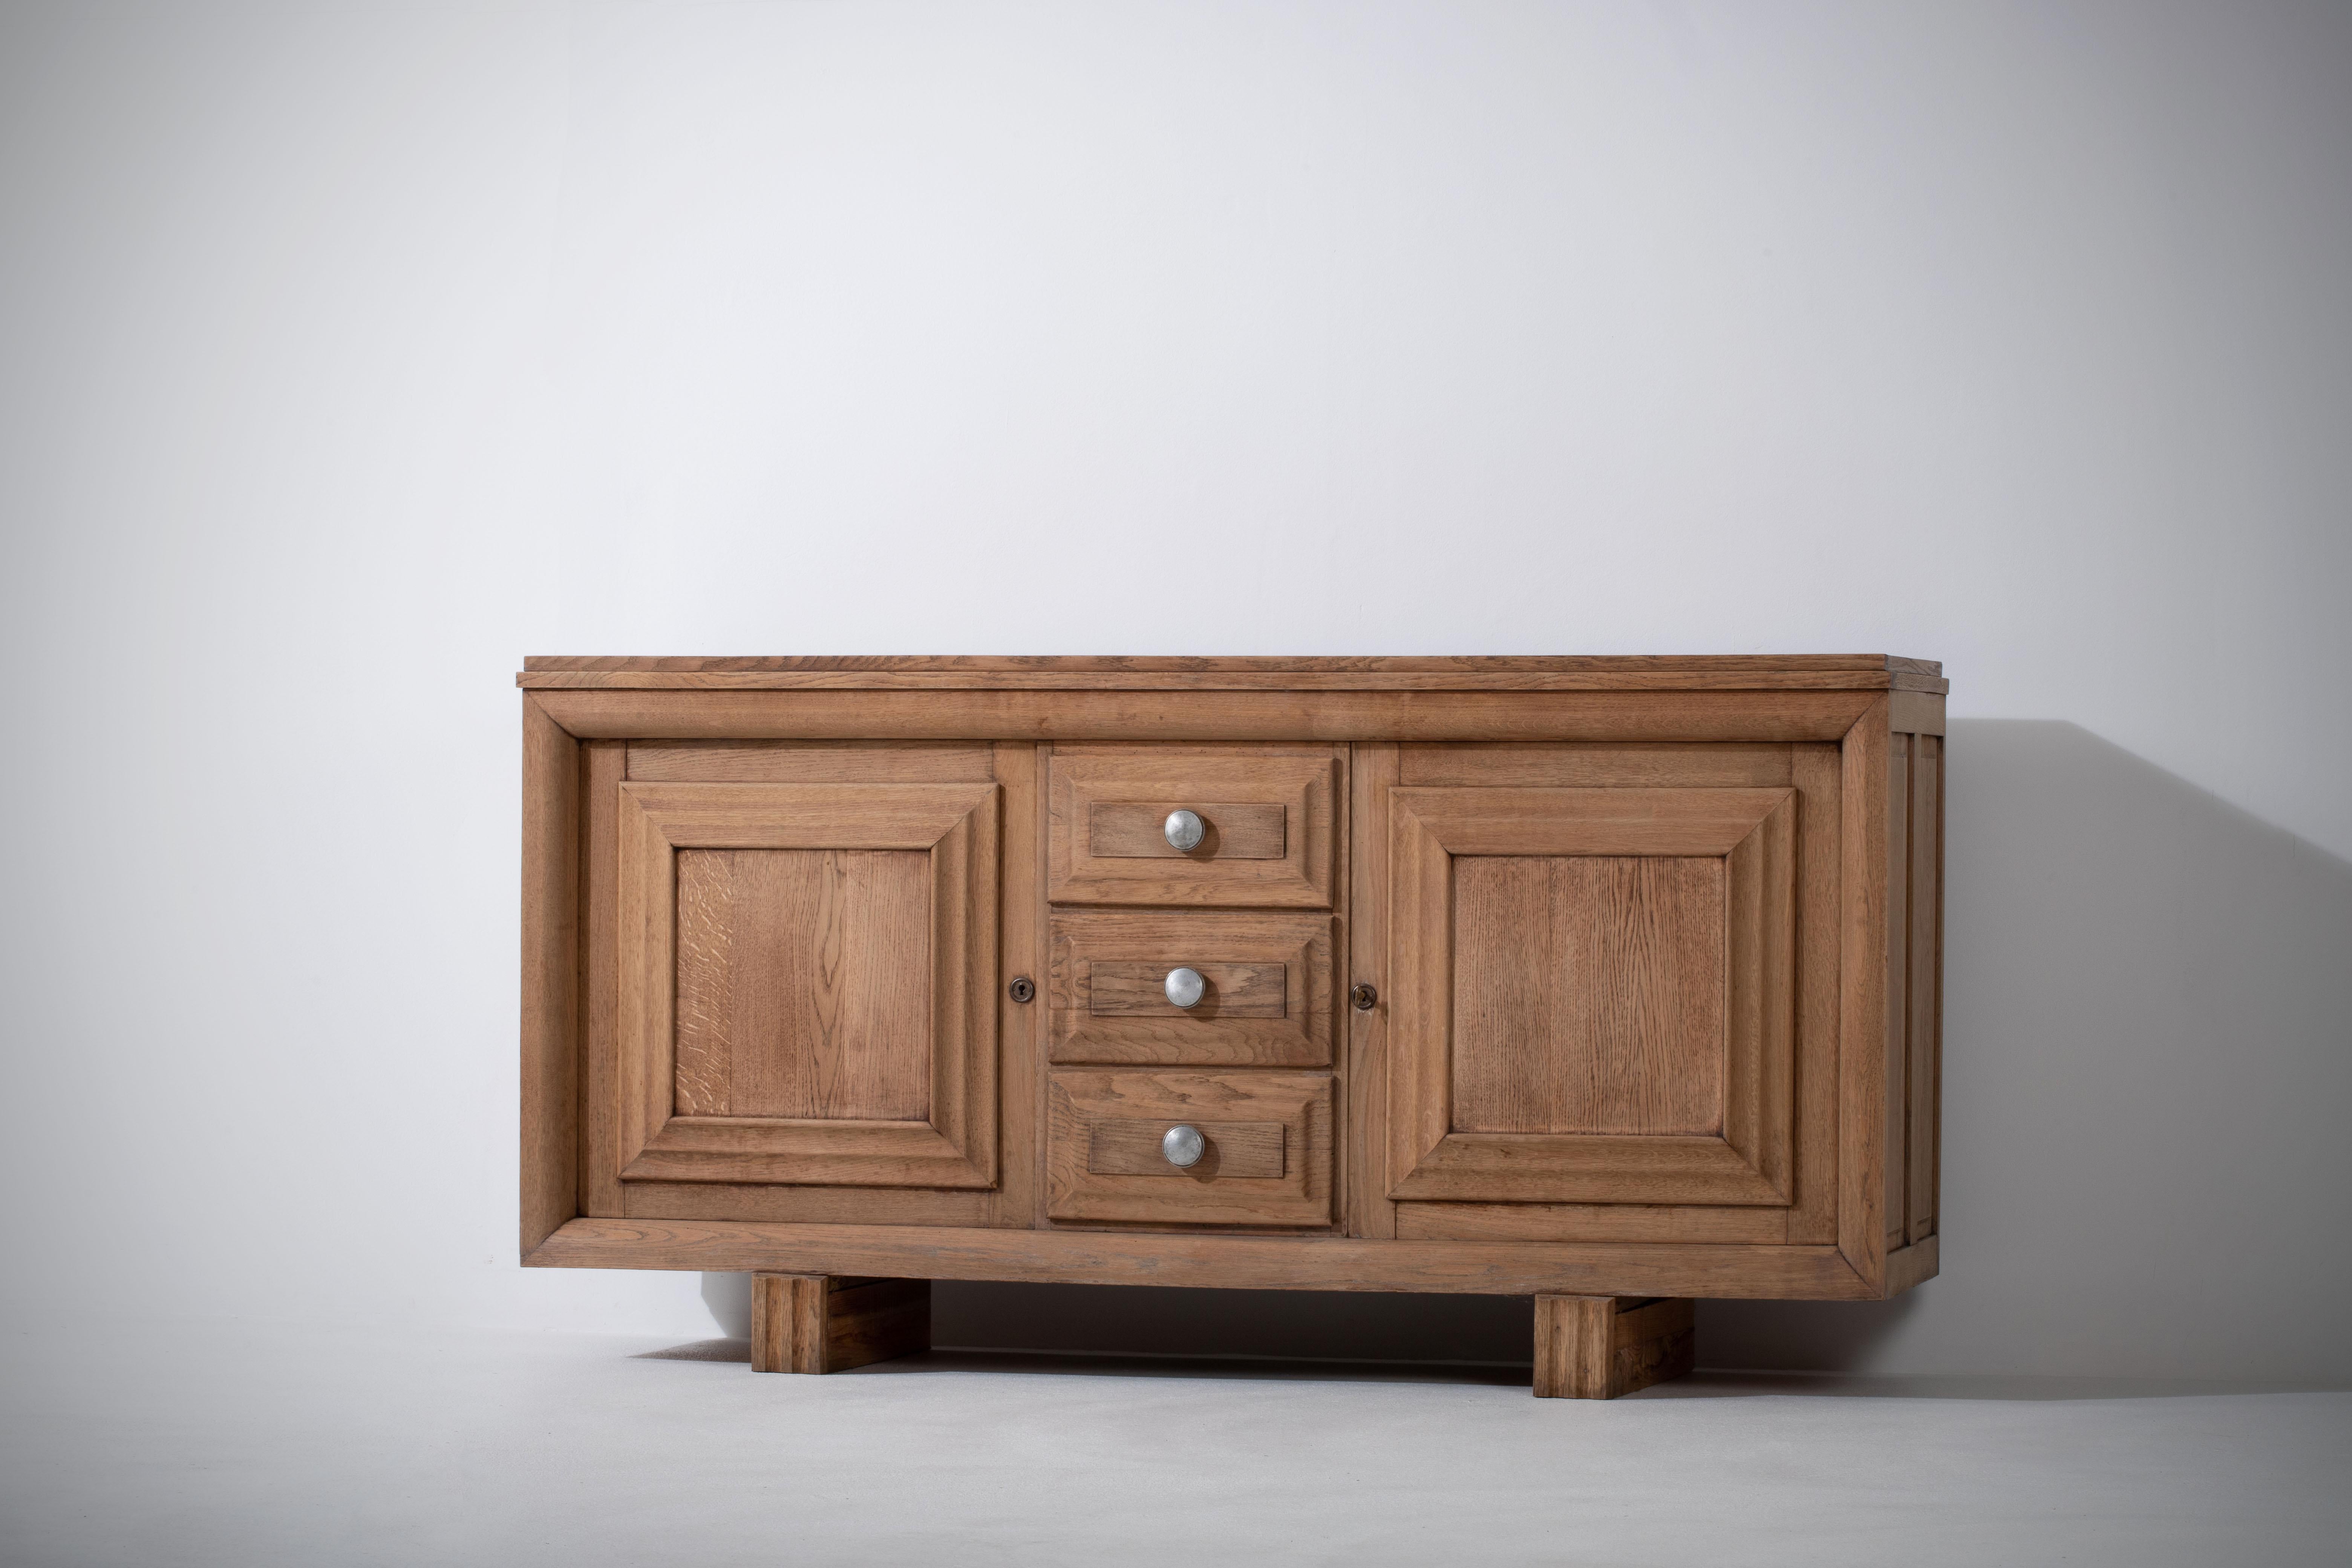 Very elegant credenza in solid oak, France, 1940s.
Art Deco brutalist sideboard. 
The credenza consists of two storage facilities covered and a column of drawers.
The refined wooden structures on the doors create a striking combination with the